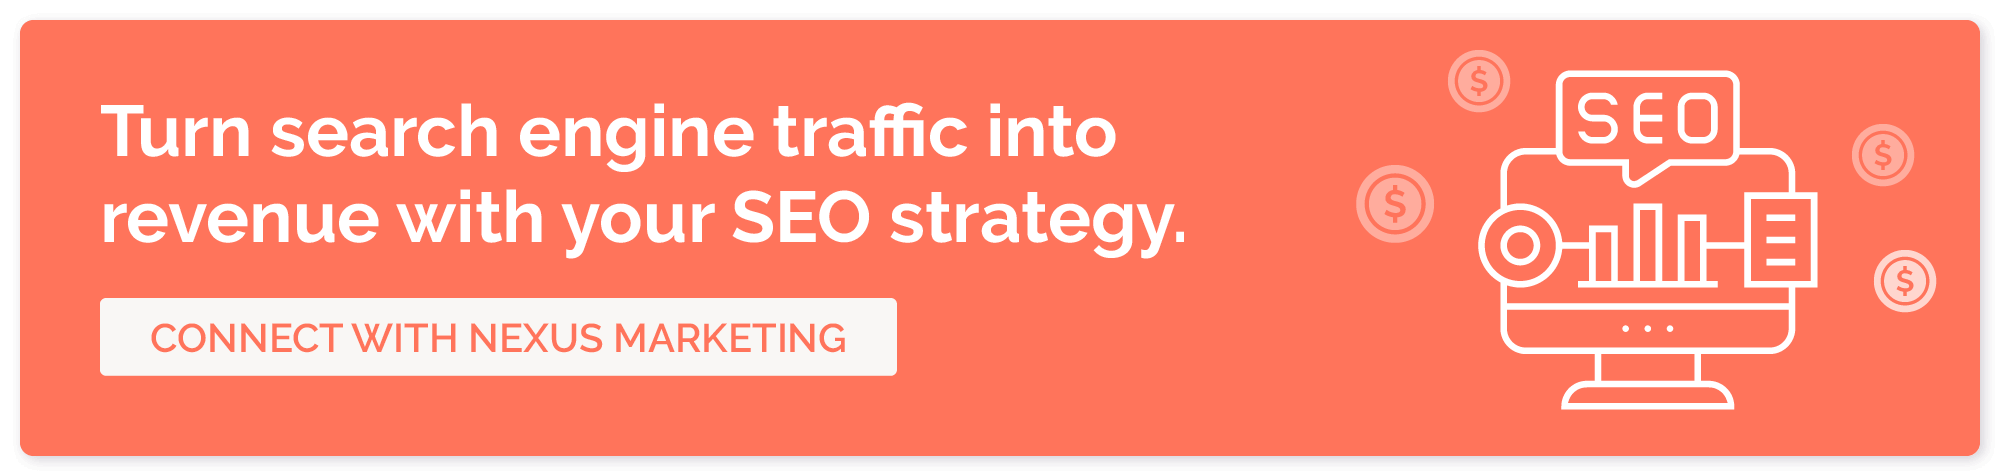 Our recommended agency can help you create a strong SEO strategy that works well with your nonprofits’ ads.